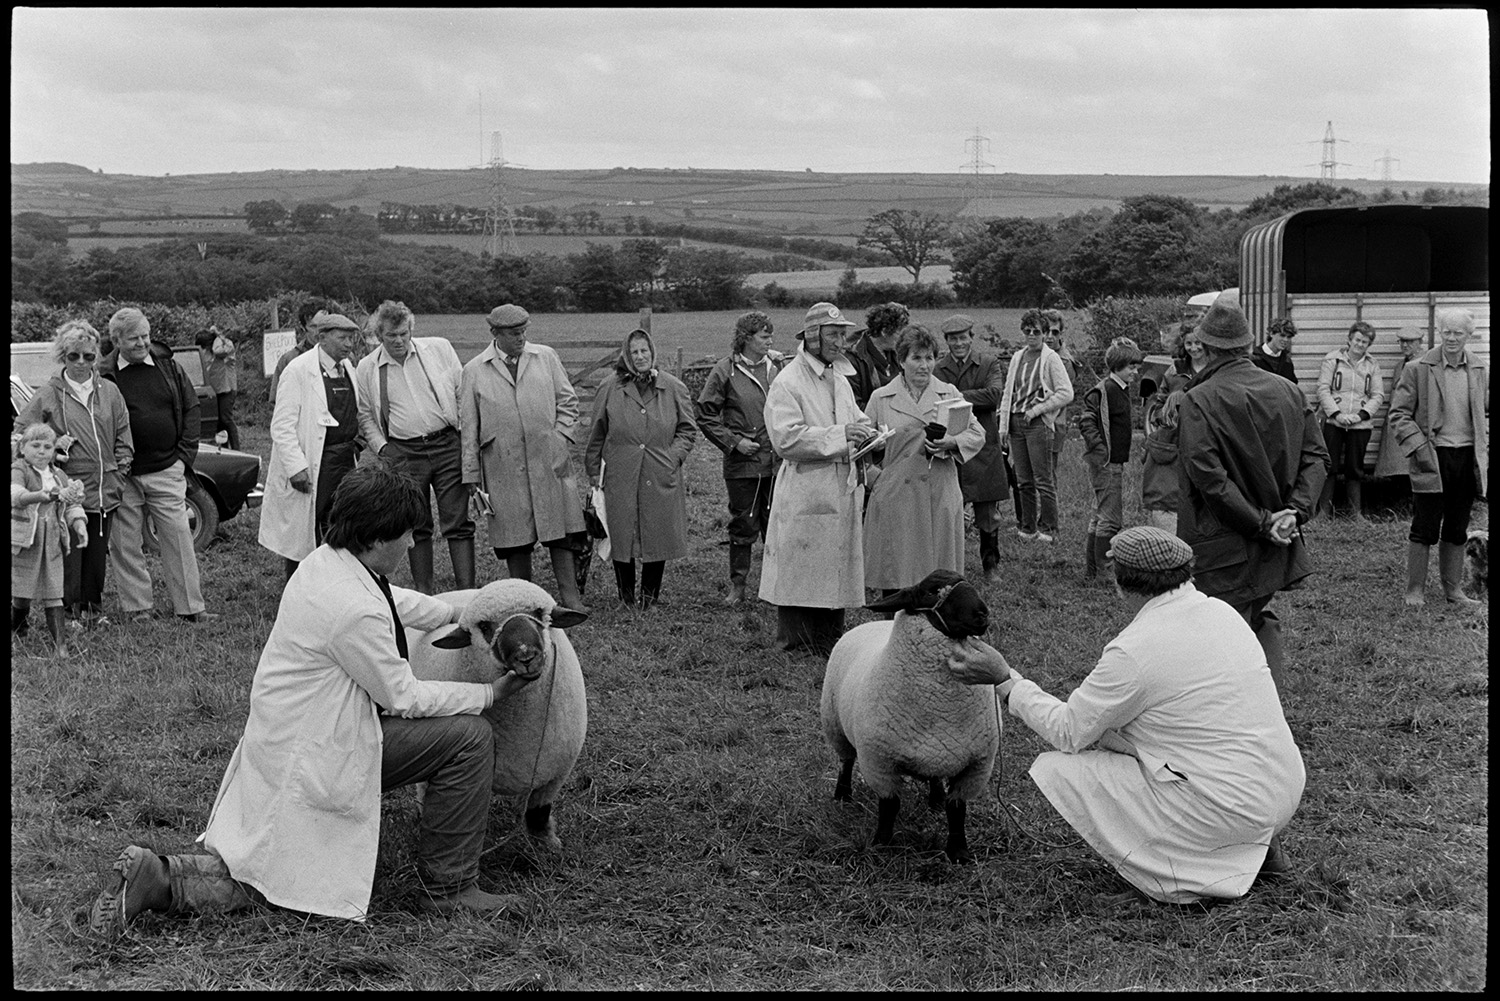 Agricultural show, judging sheep. Prize cattle in pens, spectators.
[A man judging sheep at the North Devon Show near Alverdiscott. Two men are presenting sheep in the foreground. Spectators are watching, alongside a horse box, with a landscape of fields, and trees in the background.]